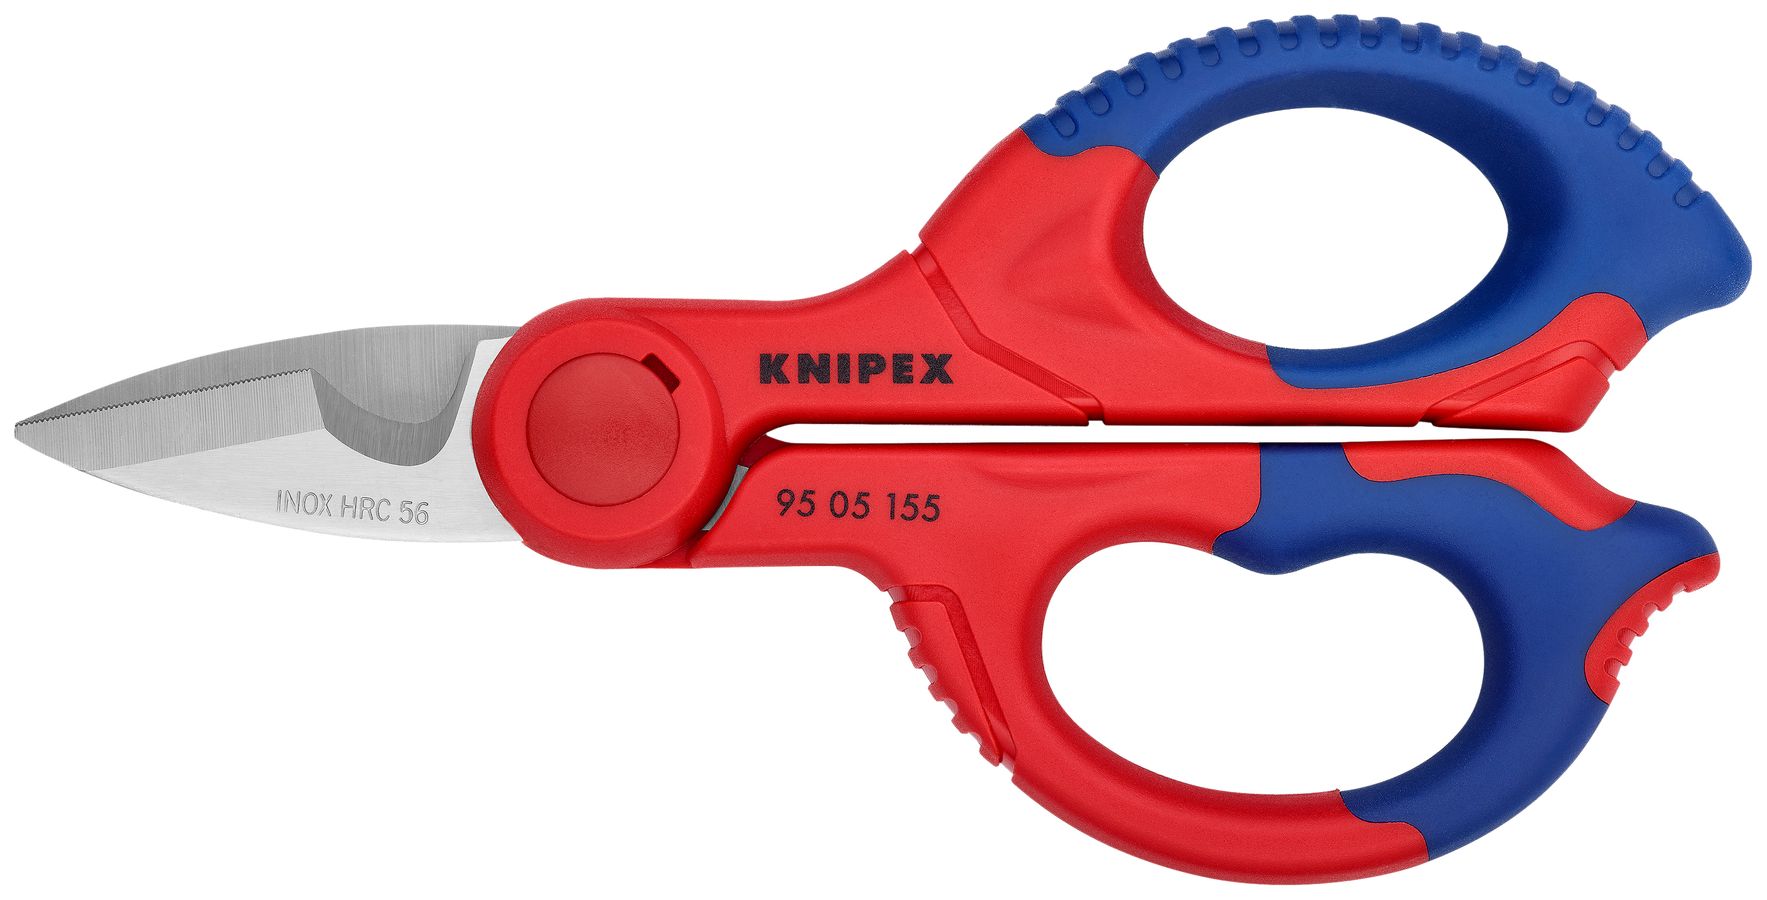 KNIPEX Tools - Electrician's Shears (9505155SBA) & Tools - Long Nose Pliers  With Cutter, Multi-Component (2612200), Multi-Colour, 8 inches